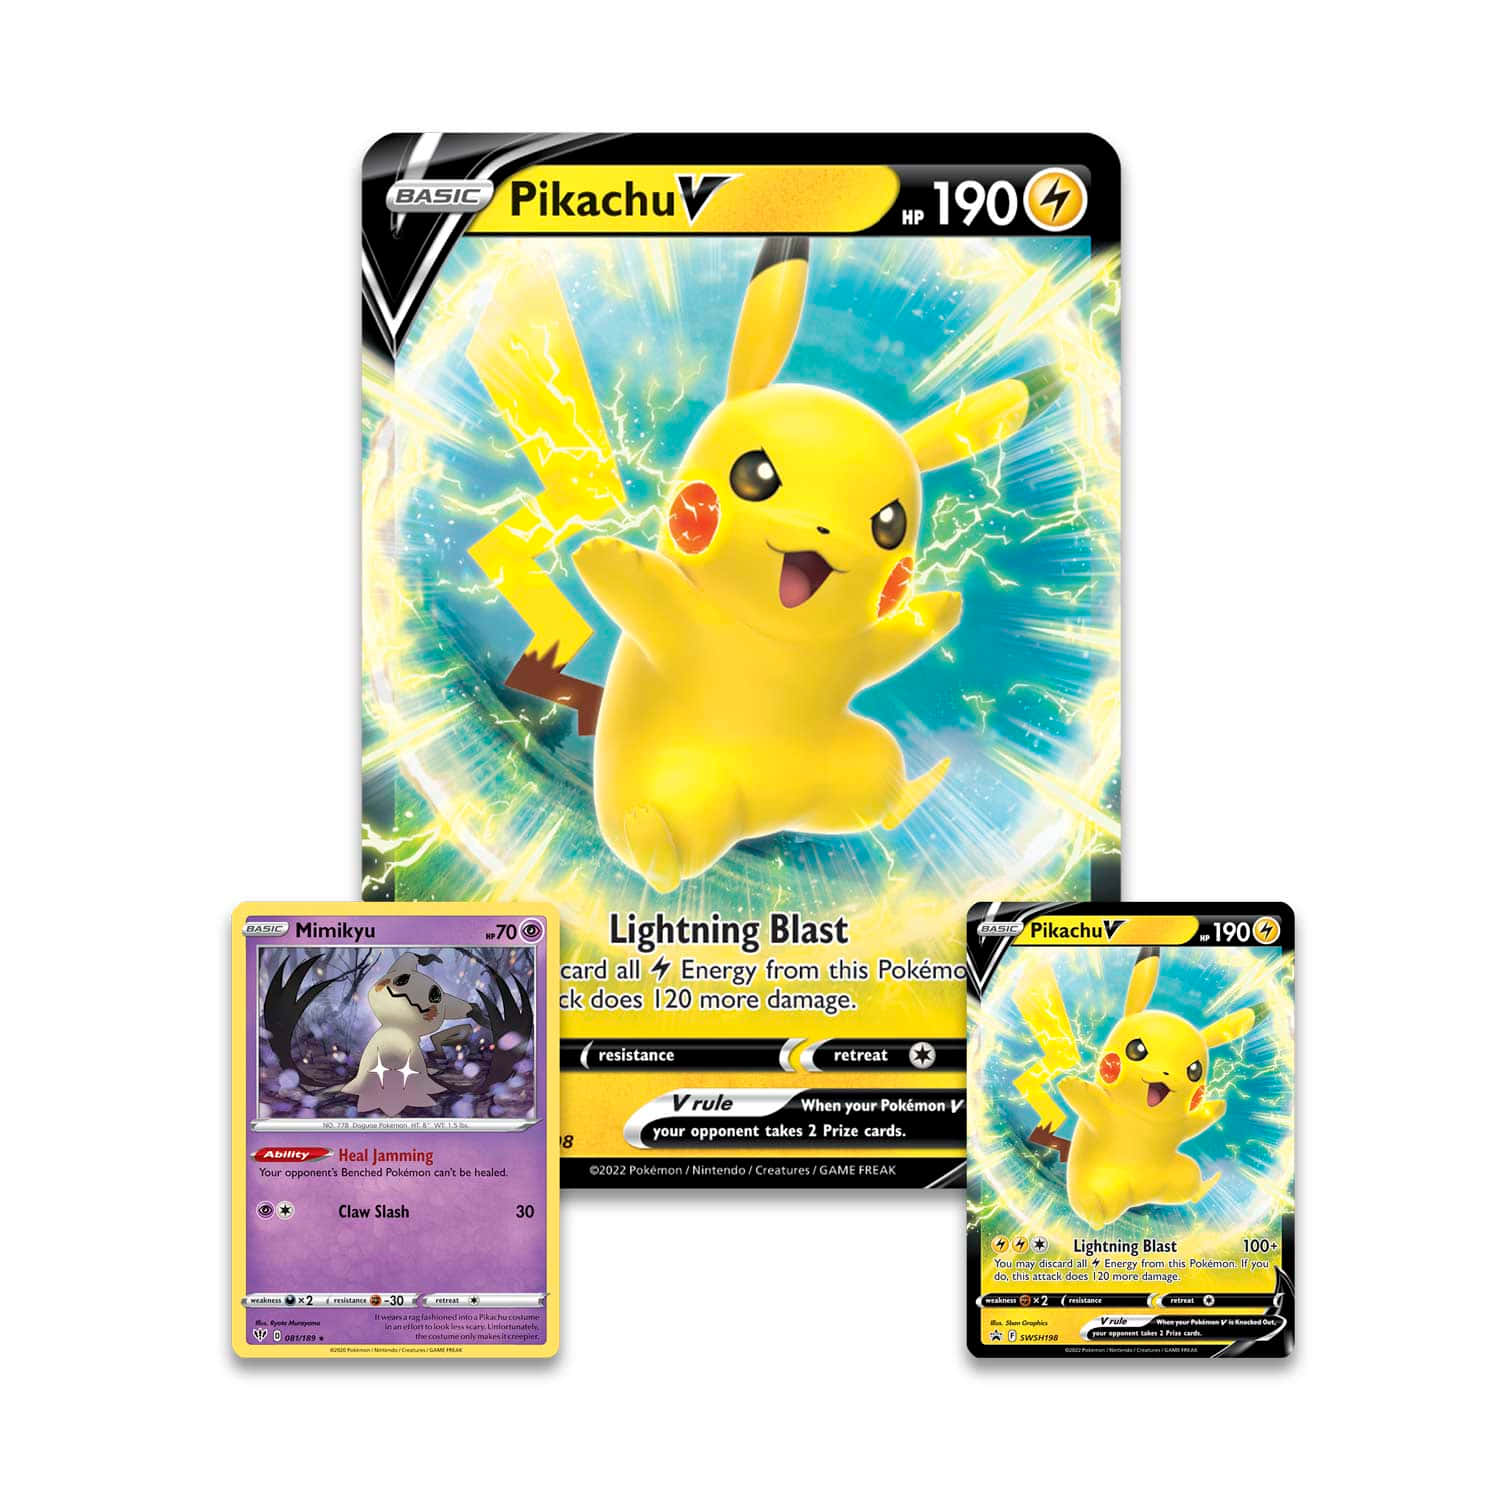 Immerse yourself into the world of Pokemon card collecting!